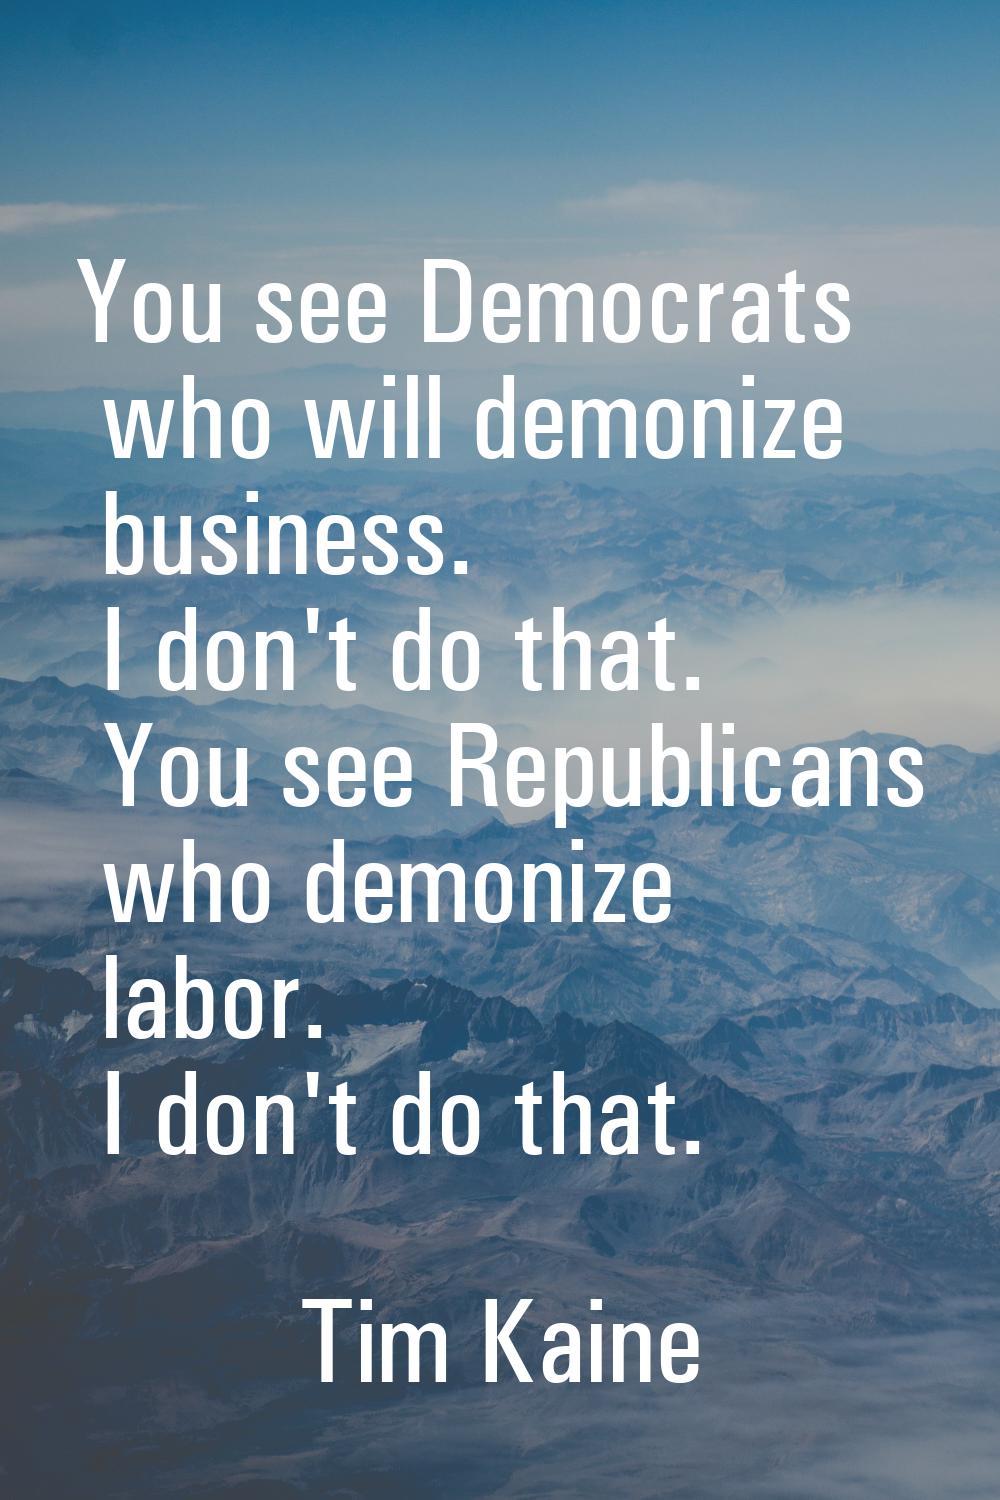 You see Democrats who will demonize business. I don't do that. You see Republicans who demonize lab